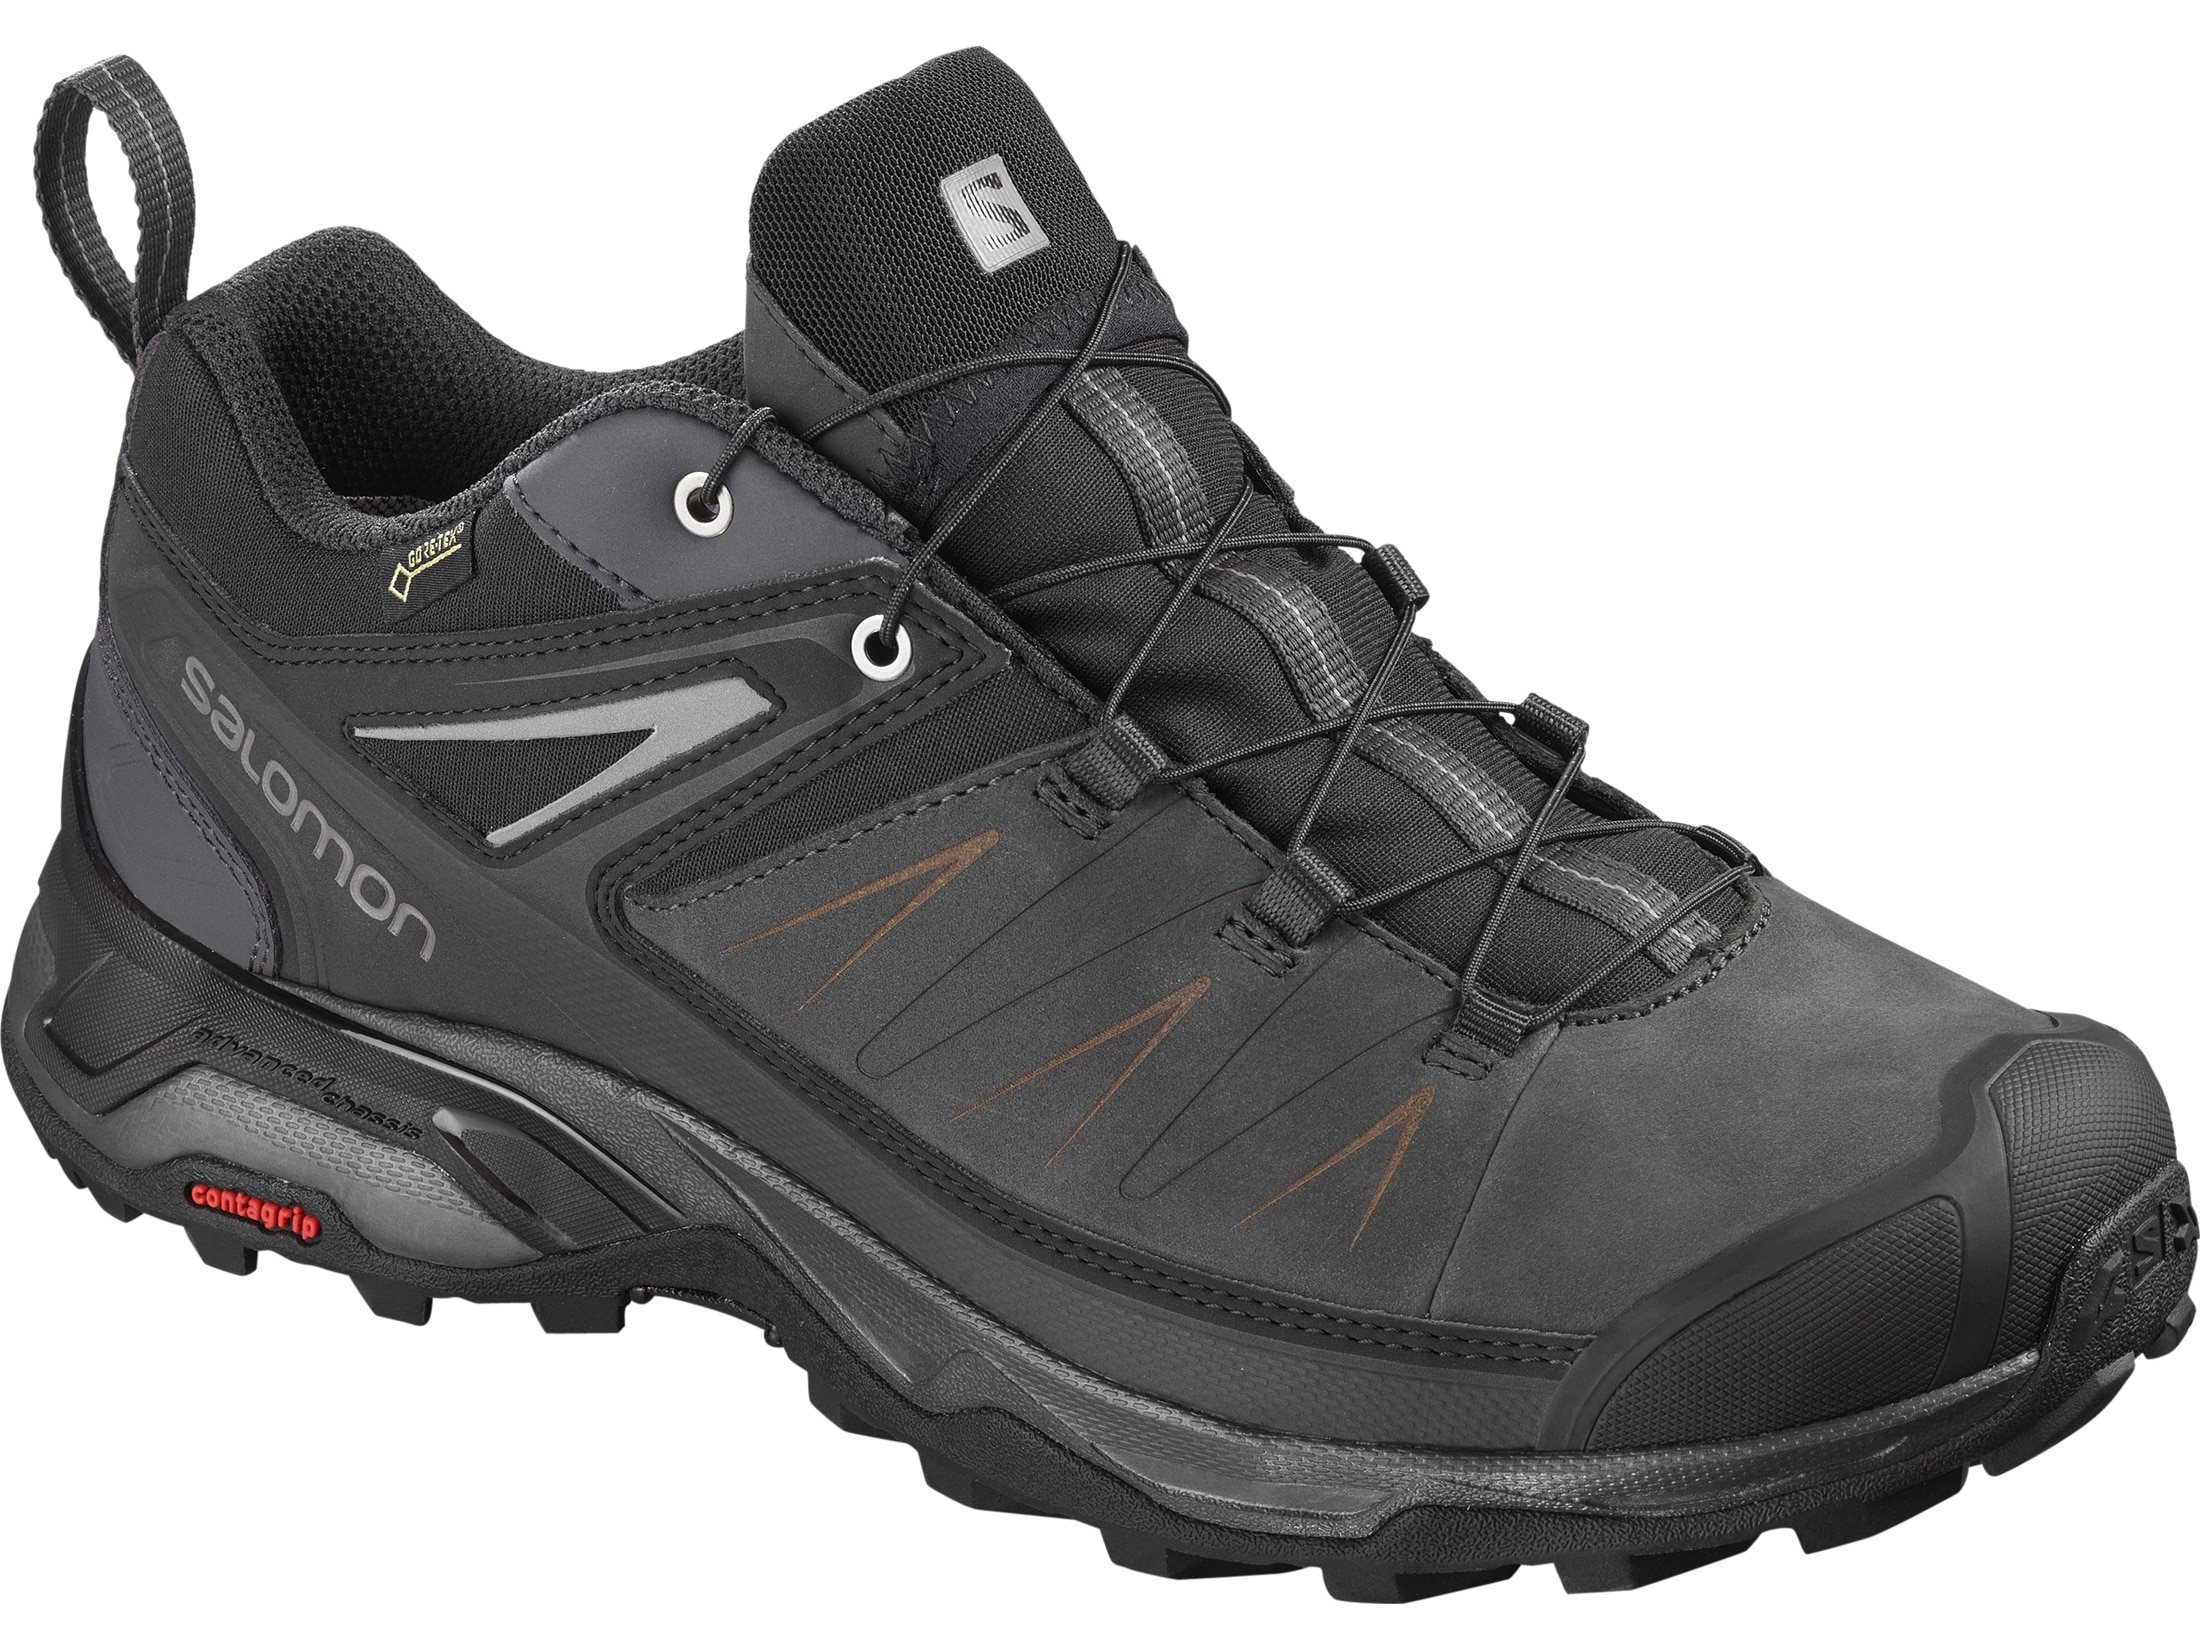 Salomon X Ultra 3 LTR GTX 4 Hiking Shoes Leather/Synthetic